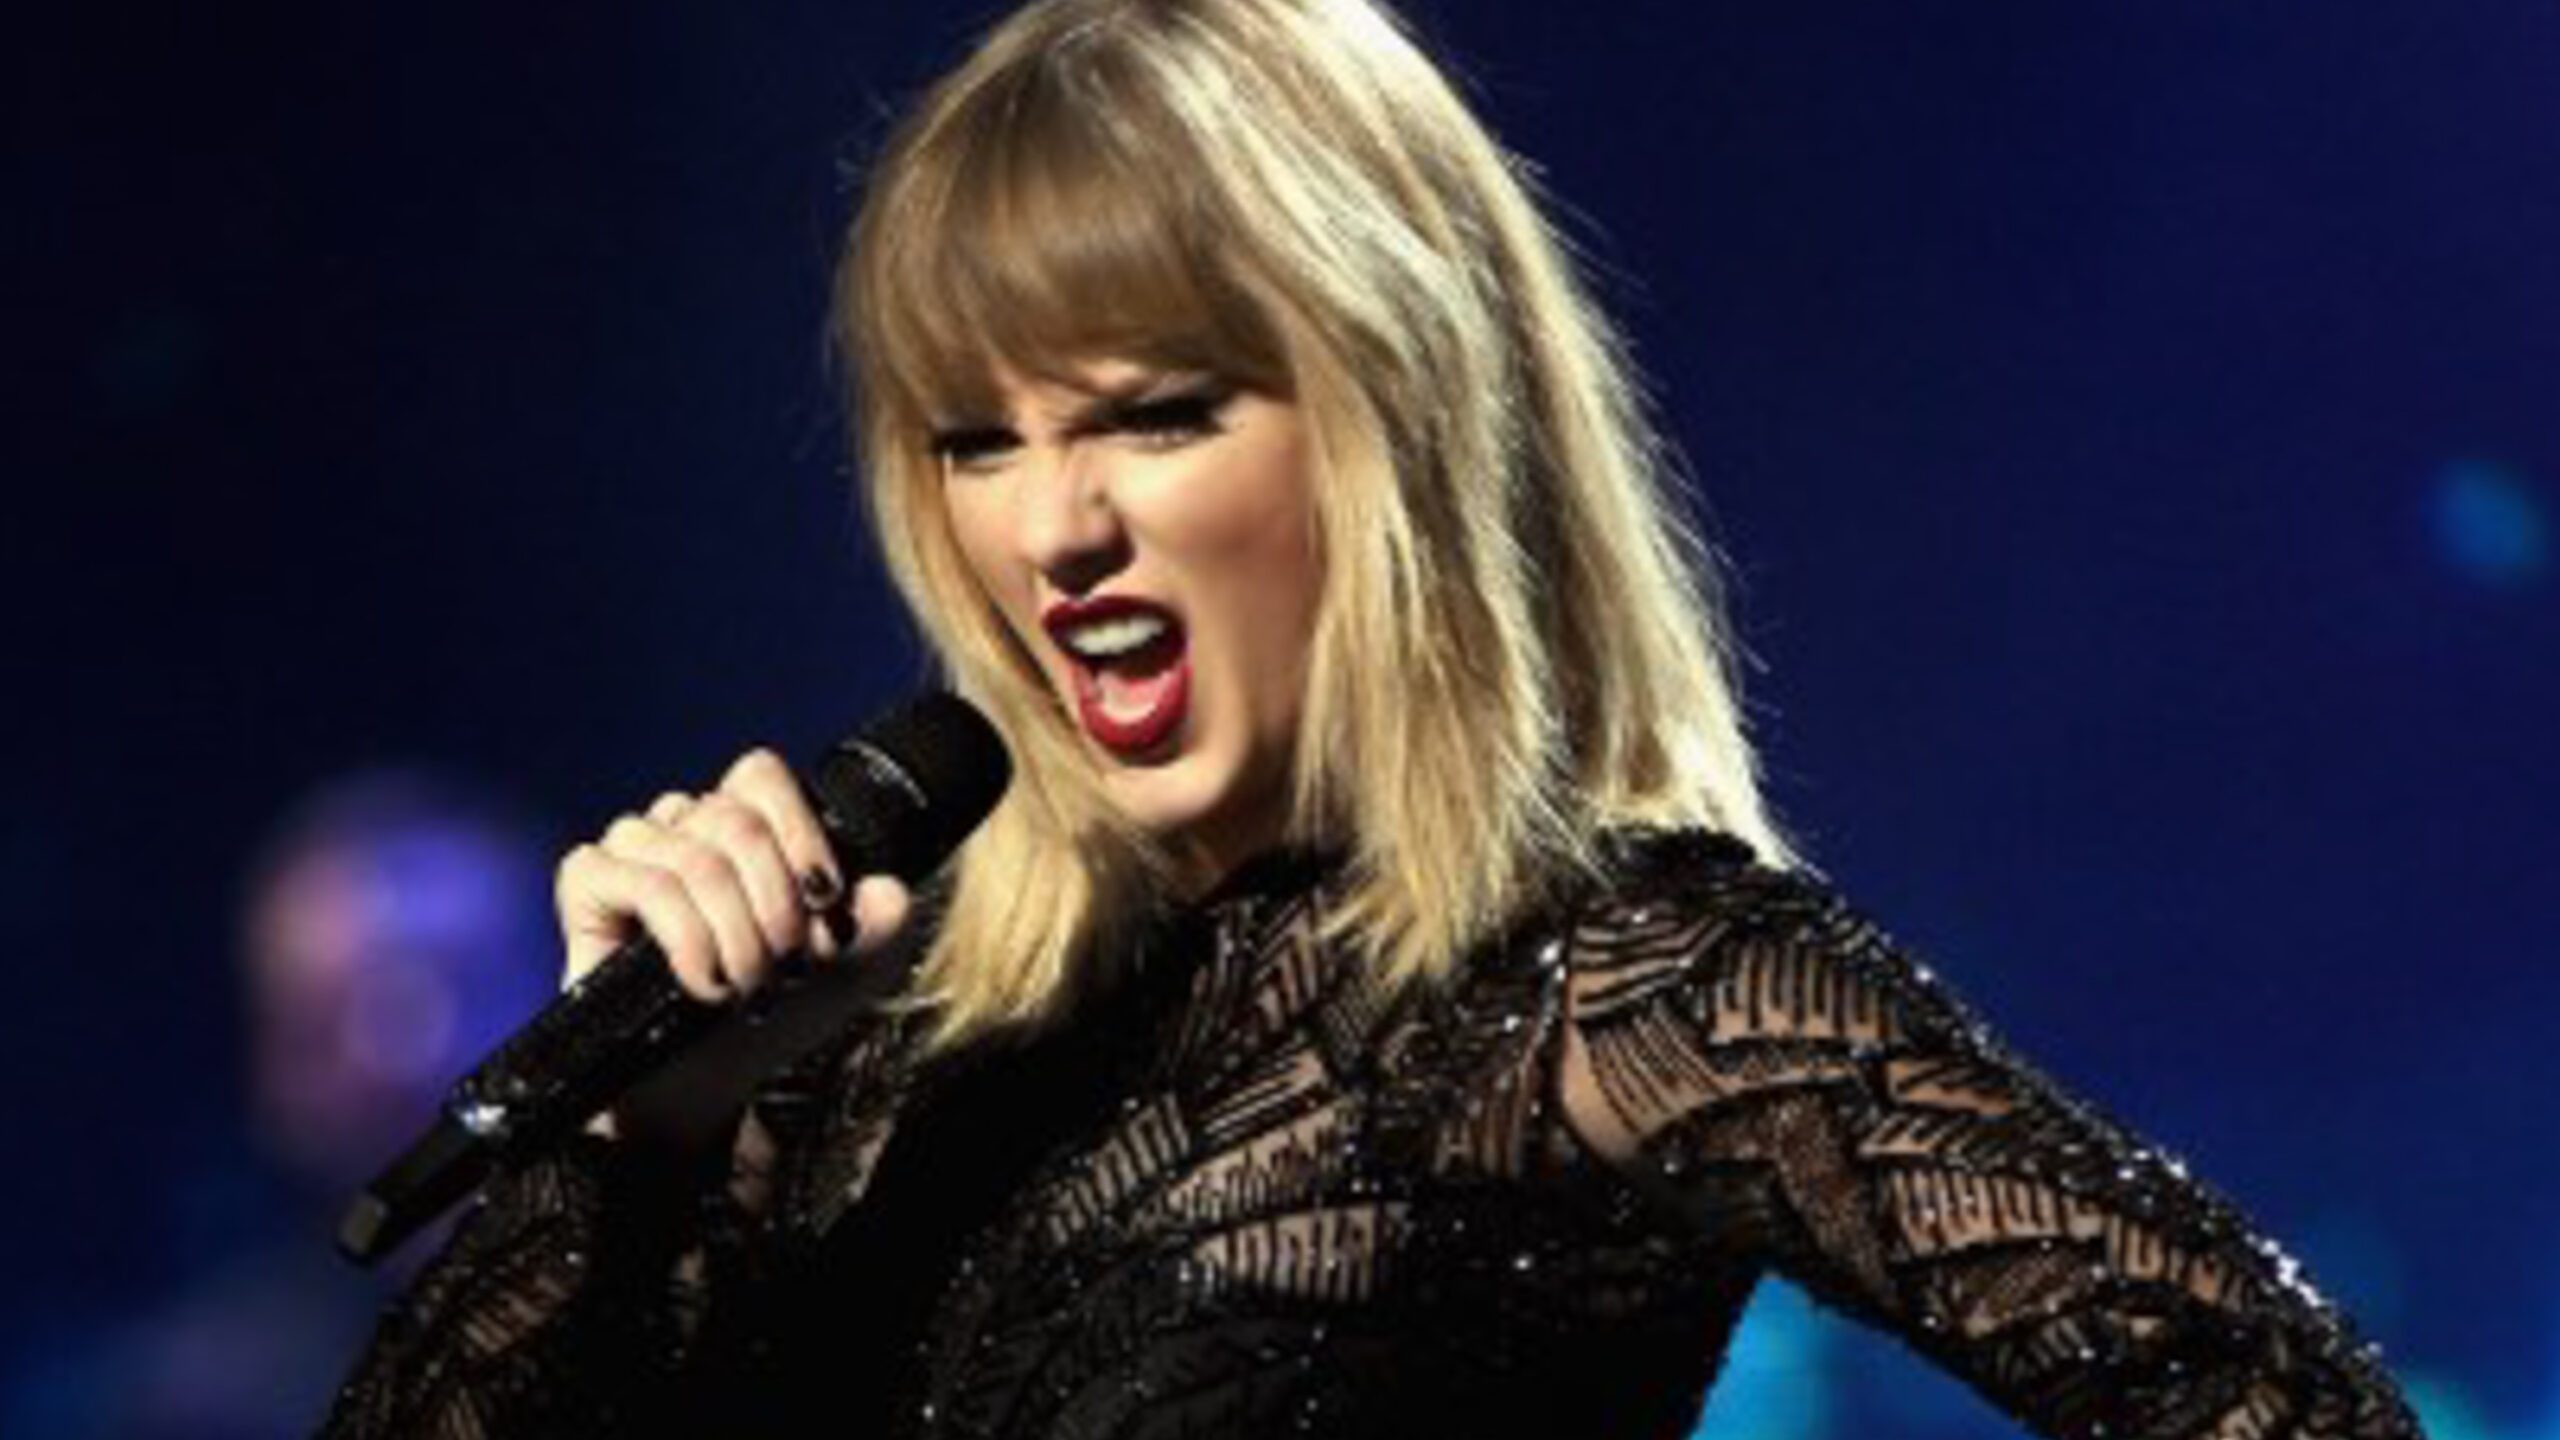 Taylor Swift’s music returns to Spotify, streaming services